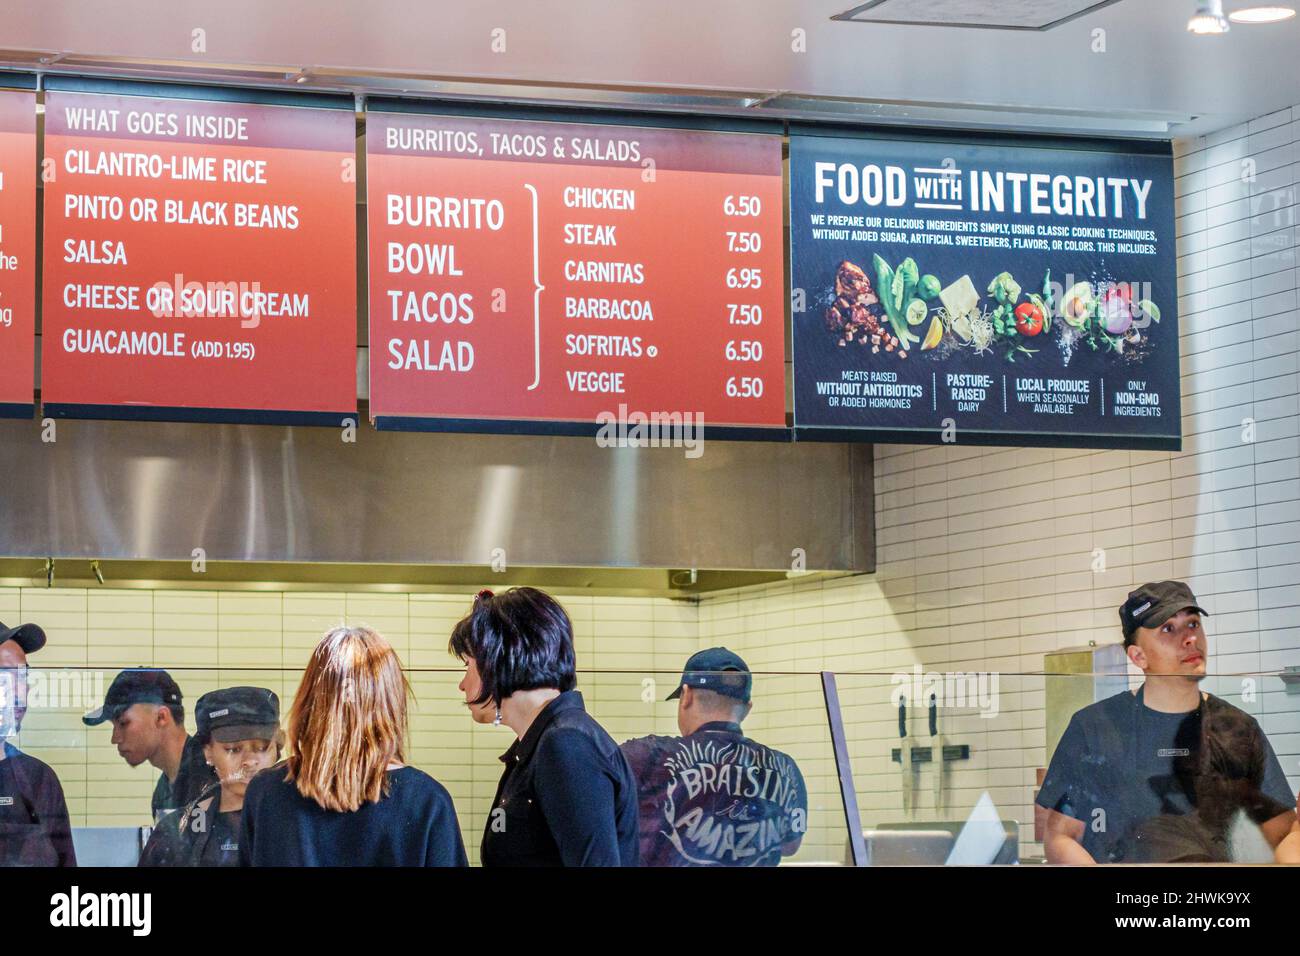 Miami Florida,Chipotle restaurant dining,Mexican interior inside line queue,overhead menu food with integrity slogan customers Stock Photo